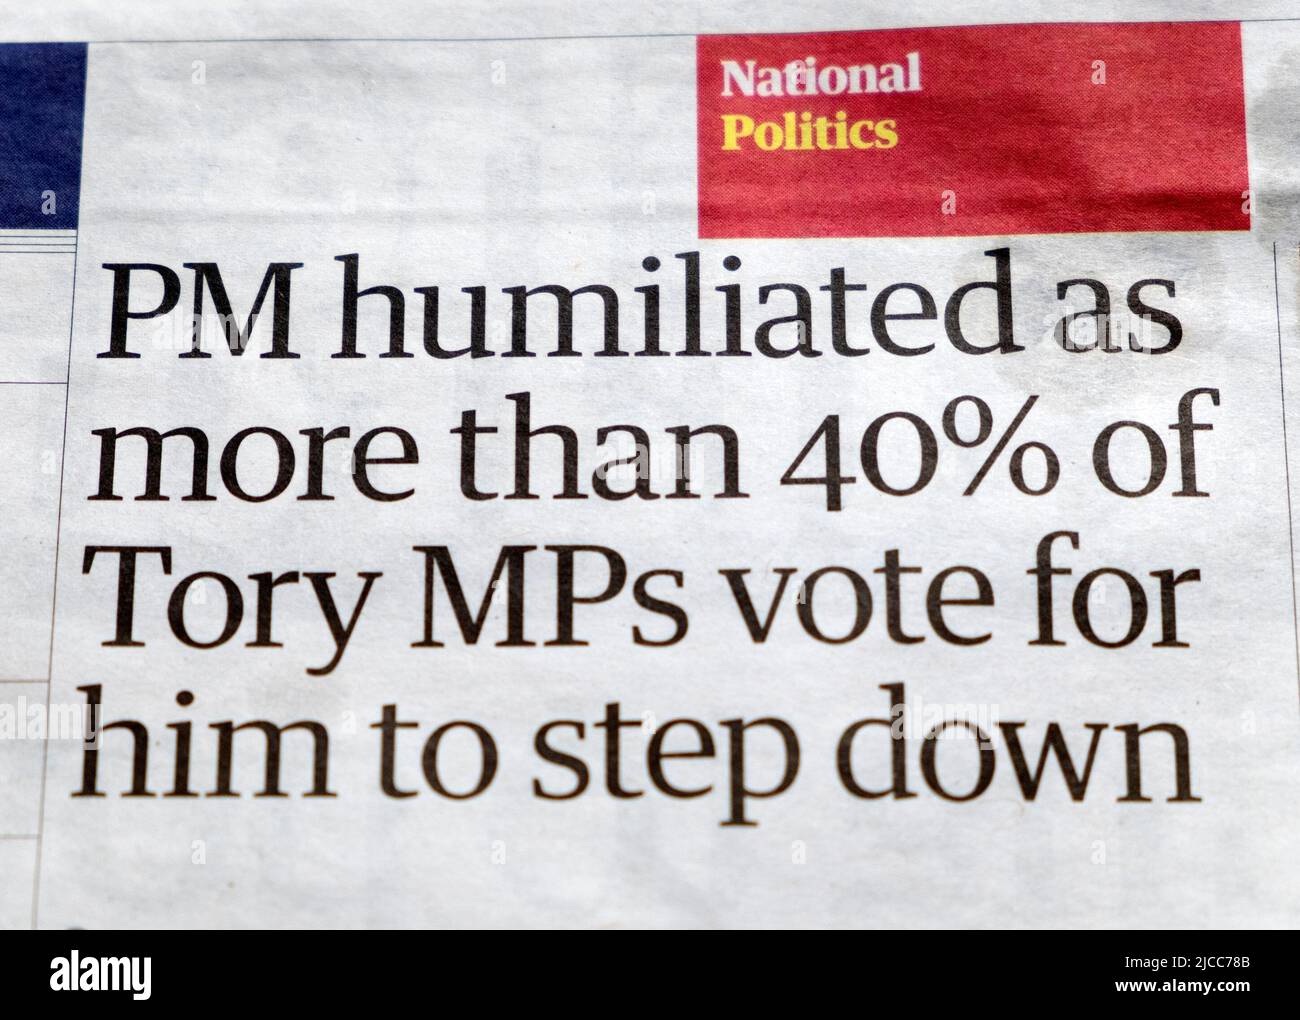 Boris Johnson 'PM humiliated as more than 40% of Tory MP's vote for him to step down' Guardian newspaper headline British politics 6 June 2022 UK Stock Photo